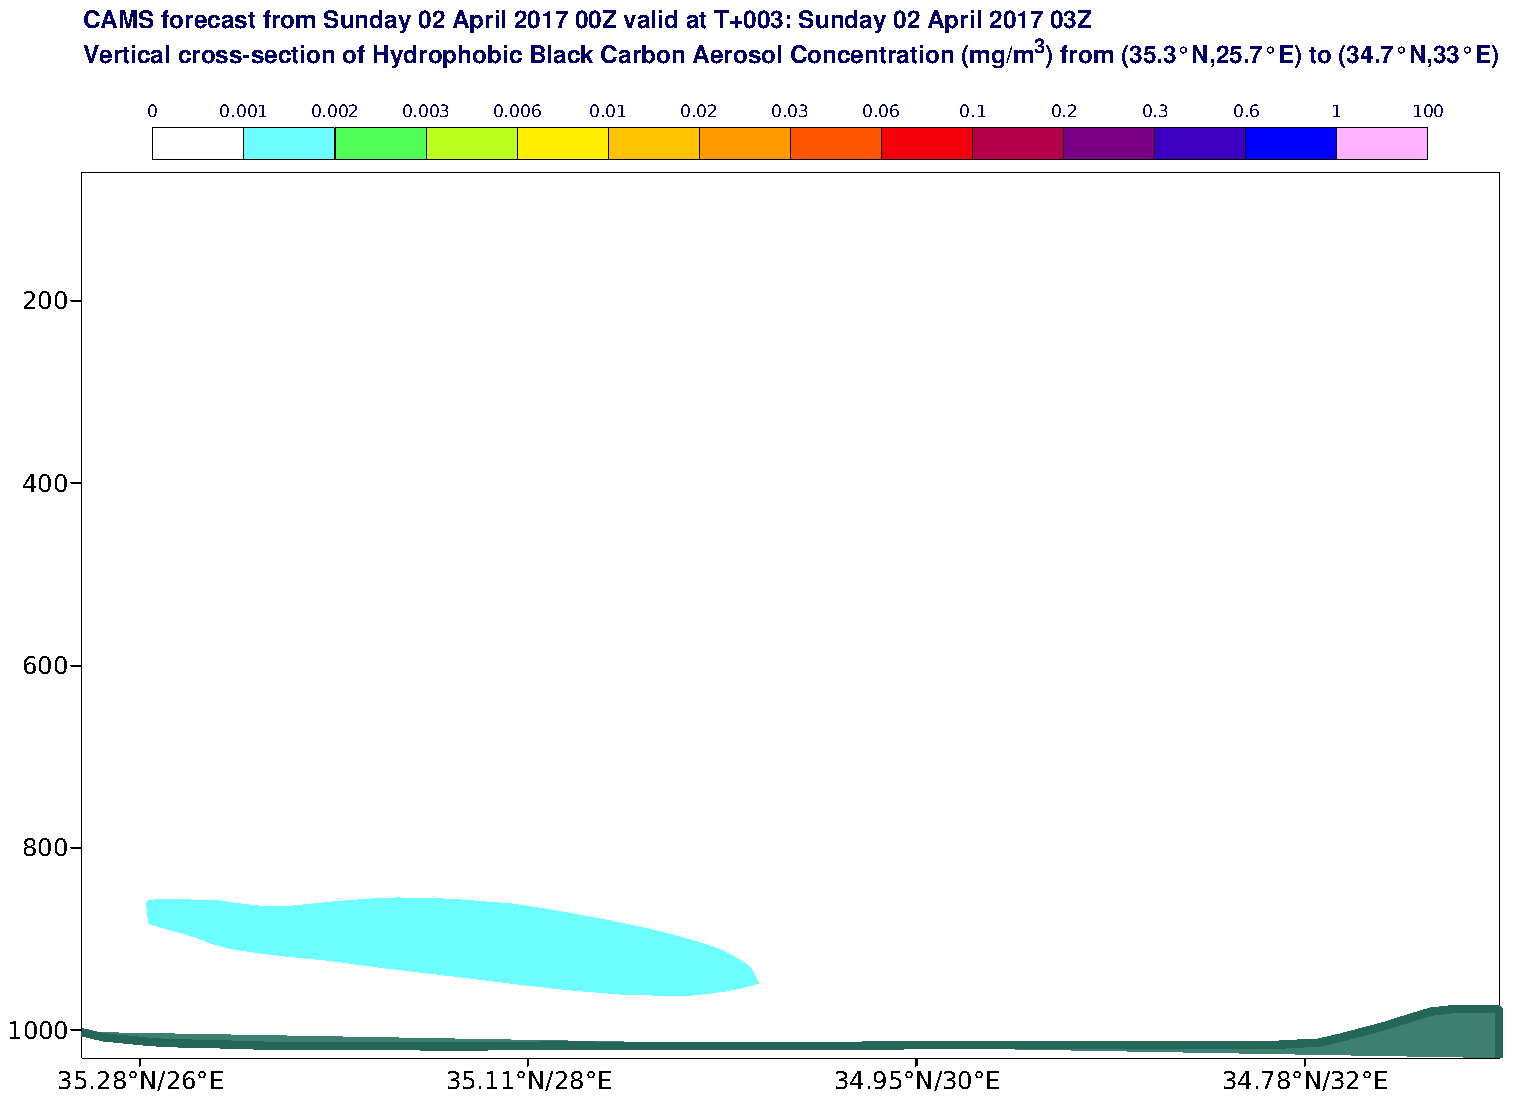 Vertical cross-section of Hydrophobic Black Carbon Aerosol Concentration (mg/m3) valid at T3 - 2017-04-02 03:00